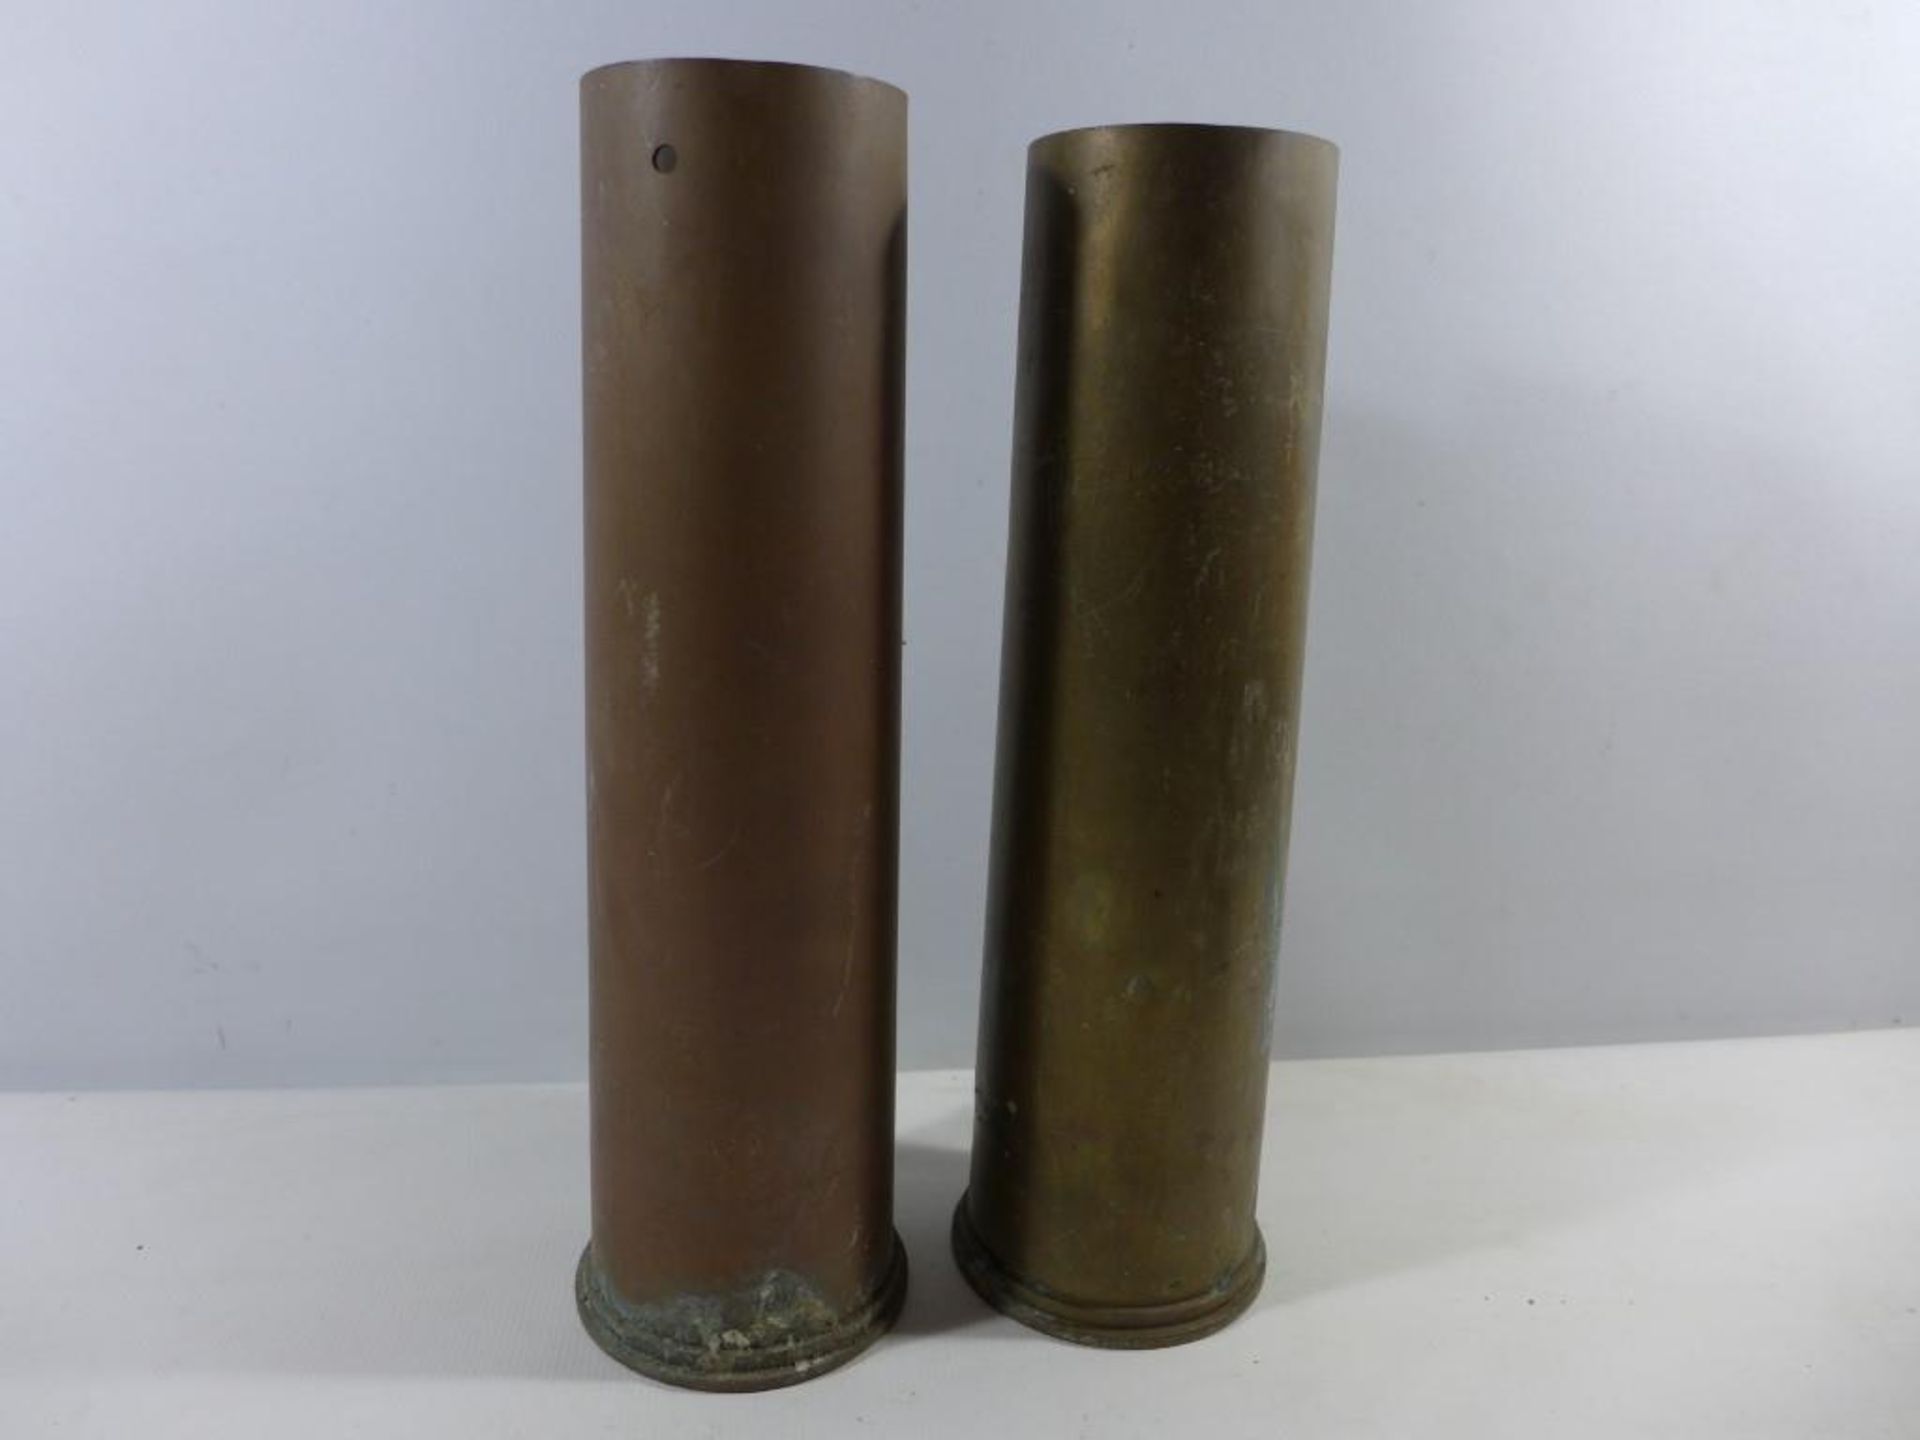 TWO LARGE BRASS SHELL CASES, HEIGHTS 44 AND 45CM